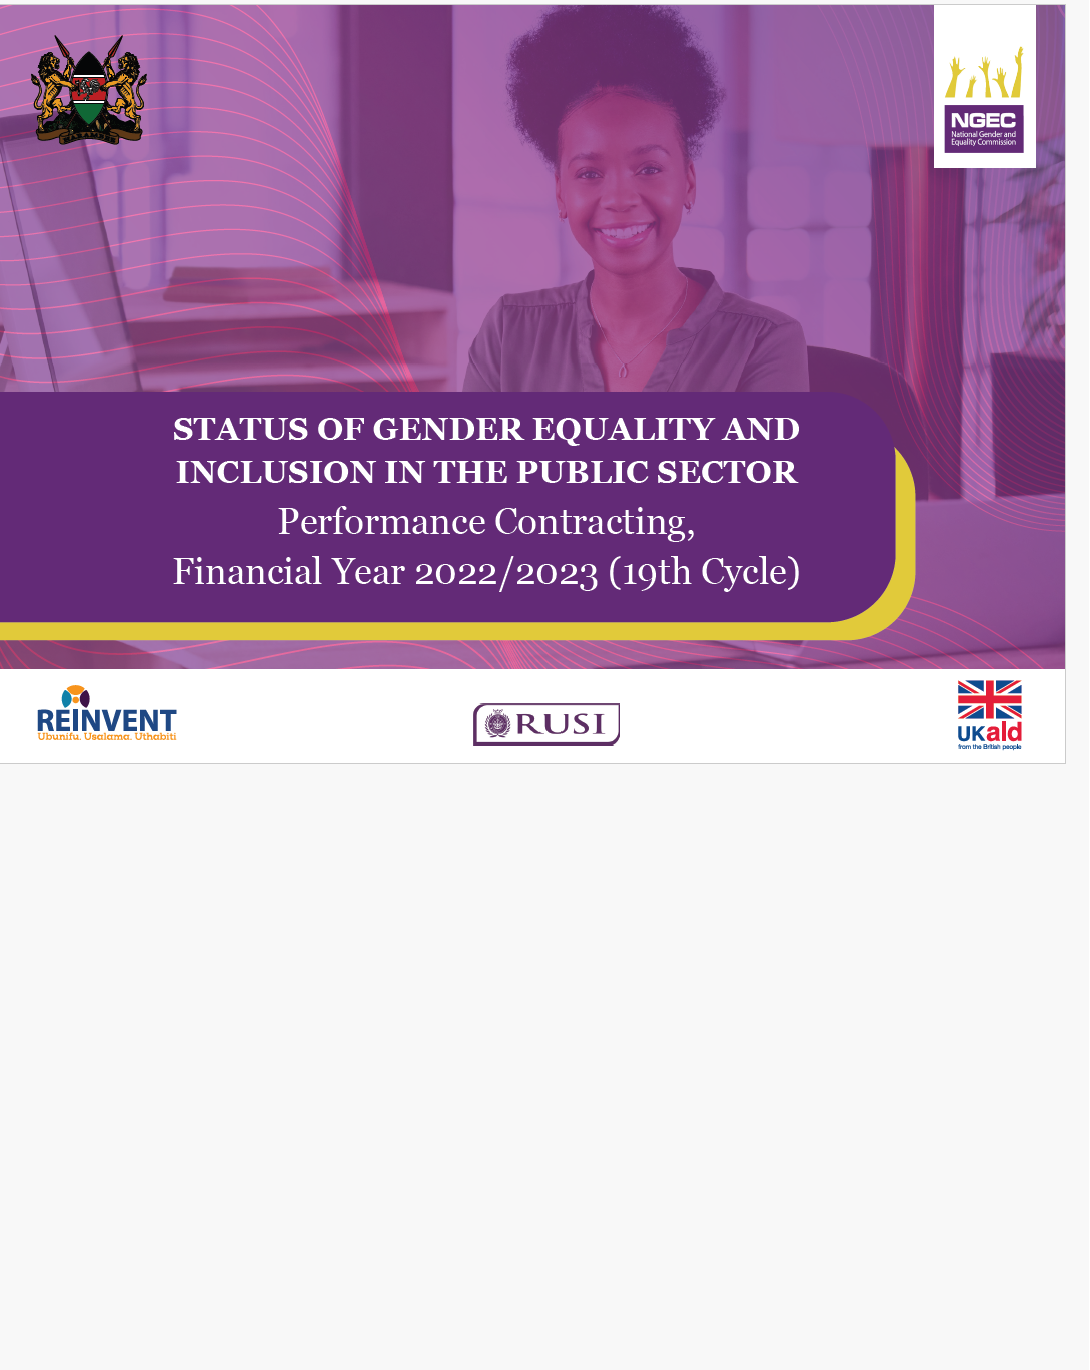 STATUS OF GENDER EQUALITY AND INCLUSION IN THE PUBLIC SECTOR